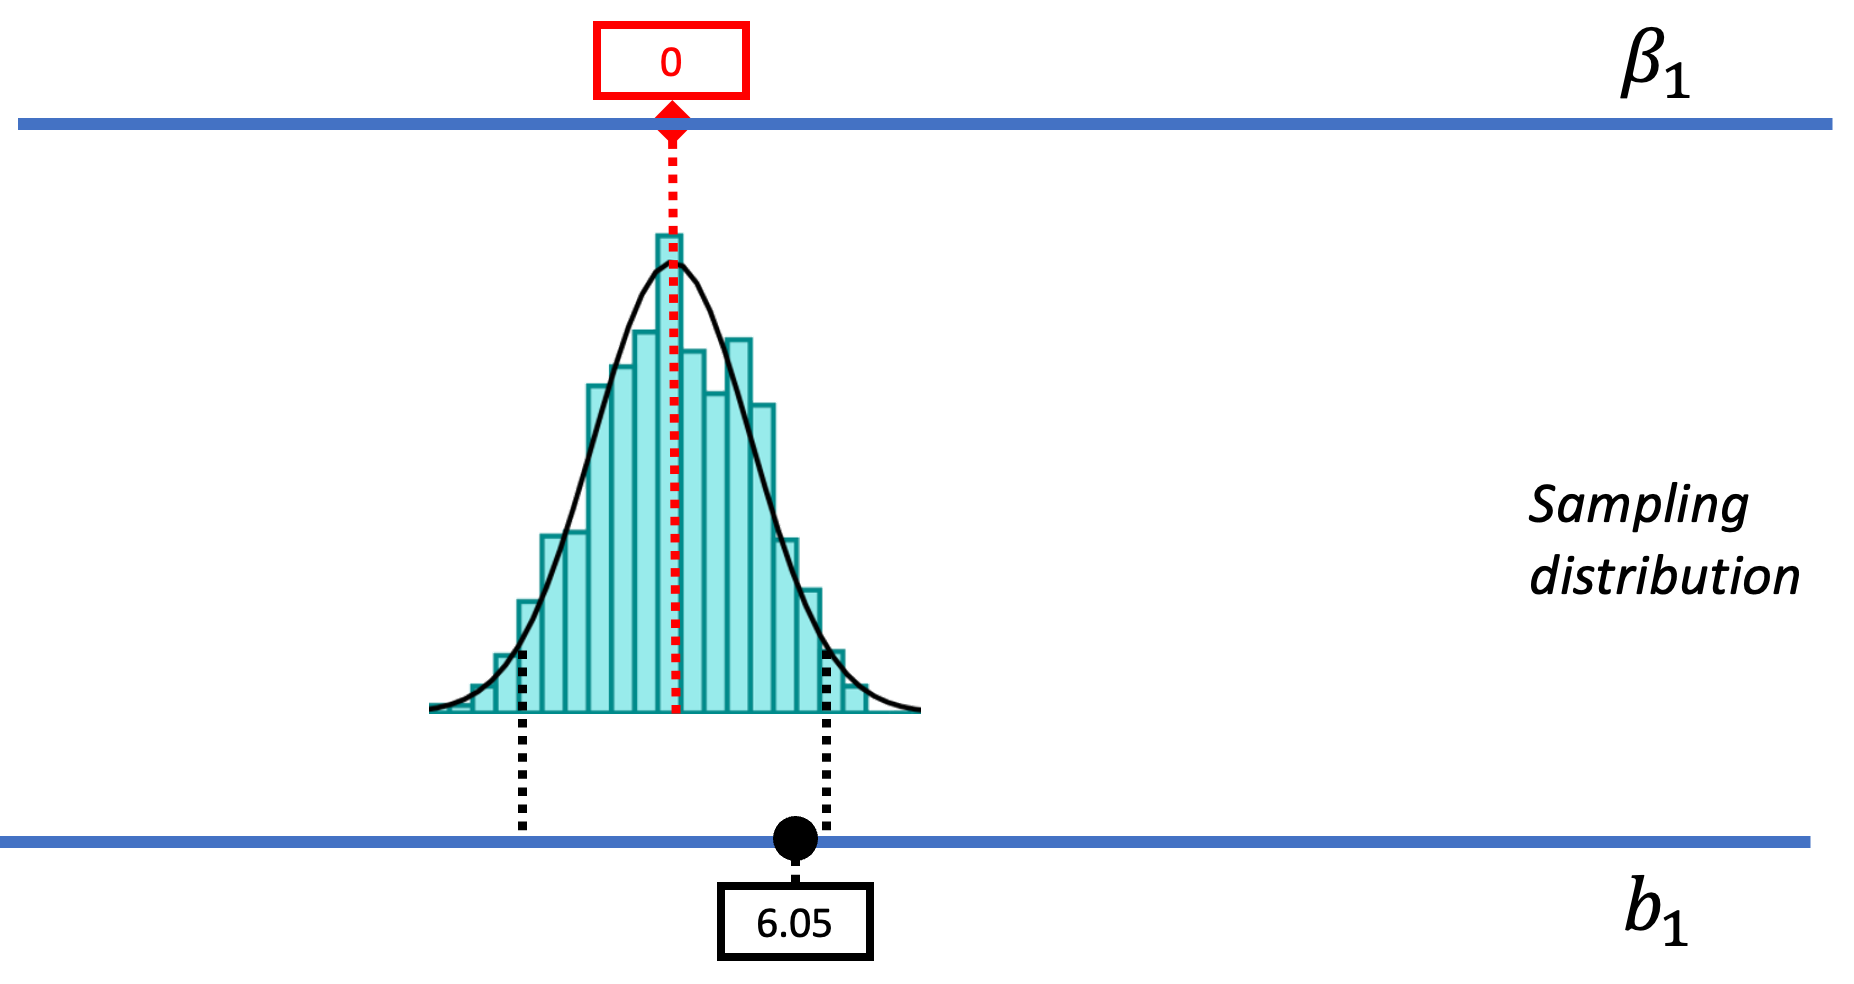 A diagram representing the DGP, the sampling distribution, and the sample. The diagram is split in 3 sections. The middle section of the diagram is the sampling distribution showing a histogram of randomly sampled b-sub-1's. Above that is an x-axis to represent the unknown beta-sub-1, currently estimated to be zero, with the histogram centered around this point. Below the sampling distribution is an x-axis to represent the sample distribution, with a point marked at the sample b-sub-1 of 6.05, which is right inside the boundary for the middle 95 percent of random samples.